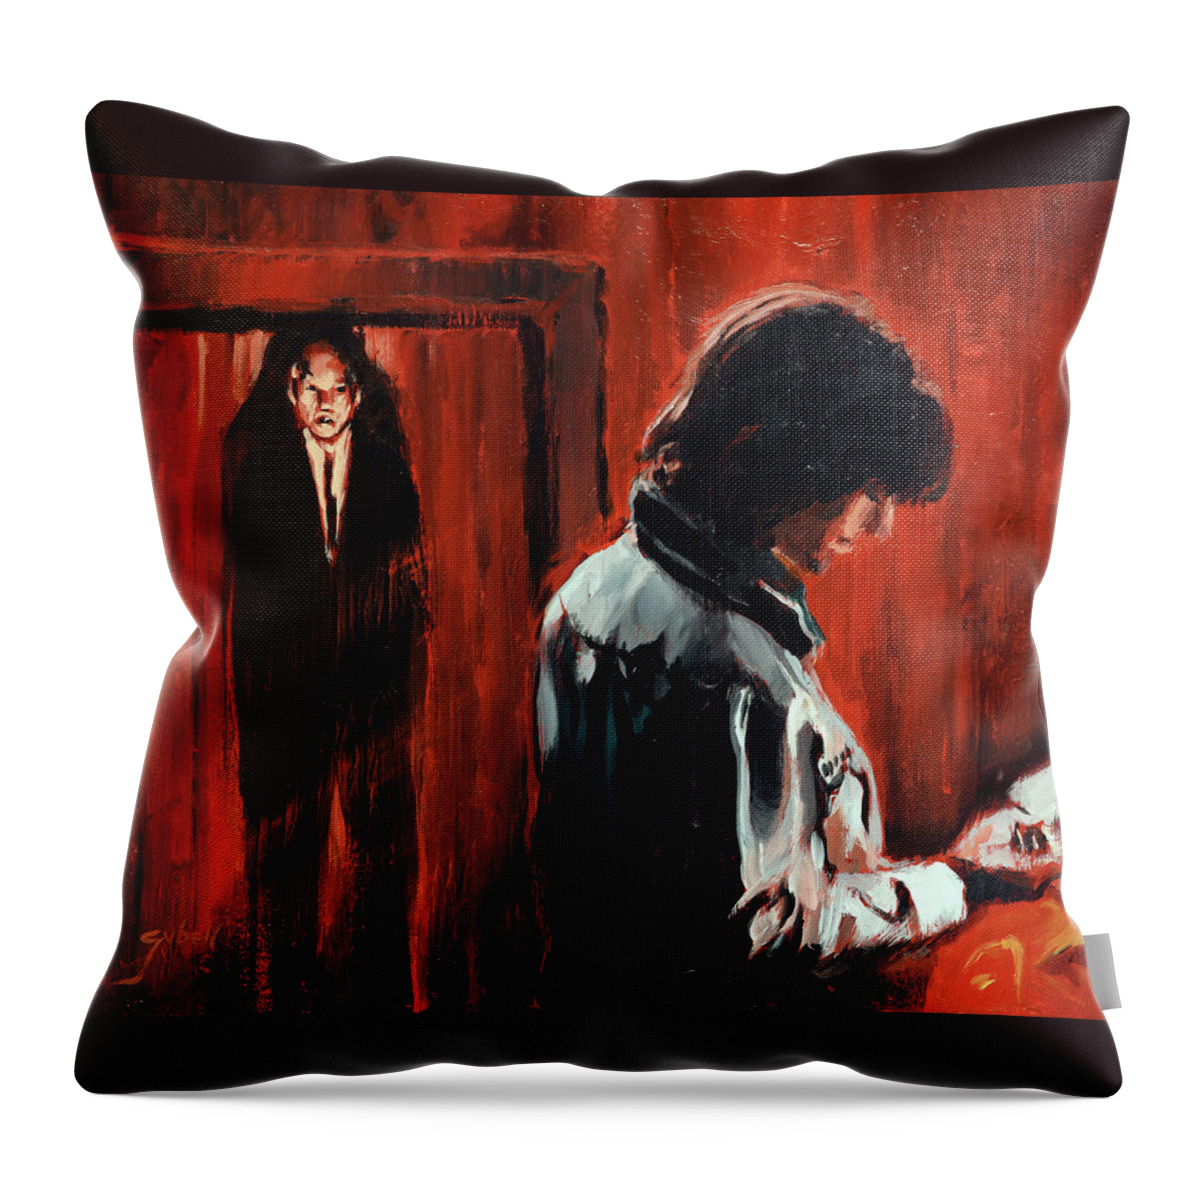 Phantasm Throw Pillow featuring the painting Mike and the Tall Man by Sv Bell